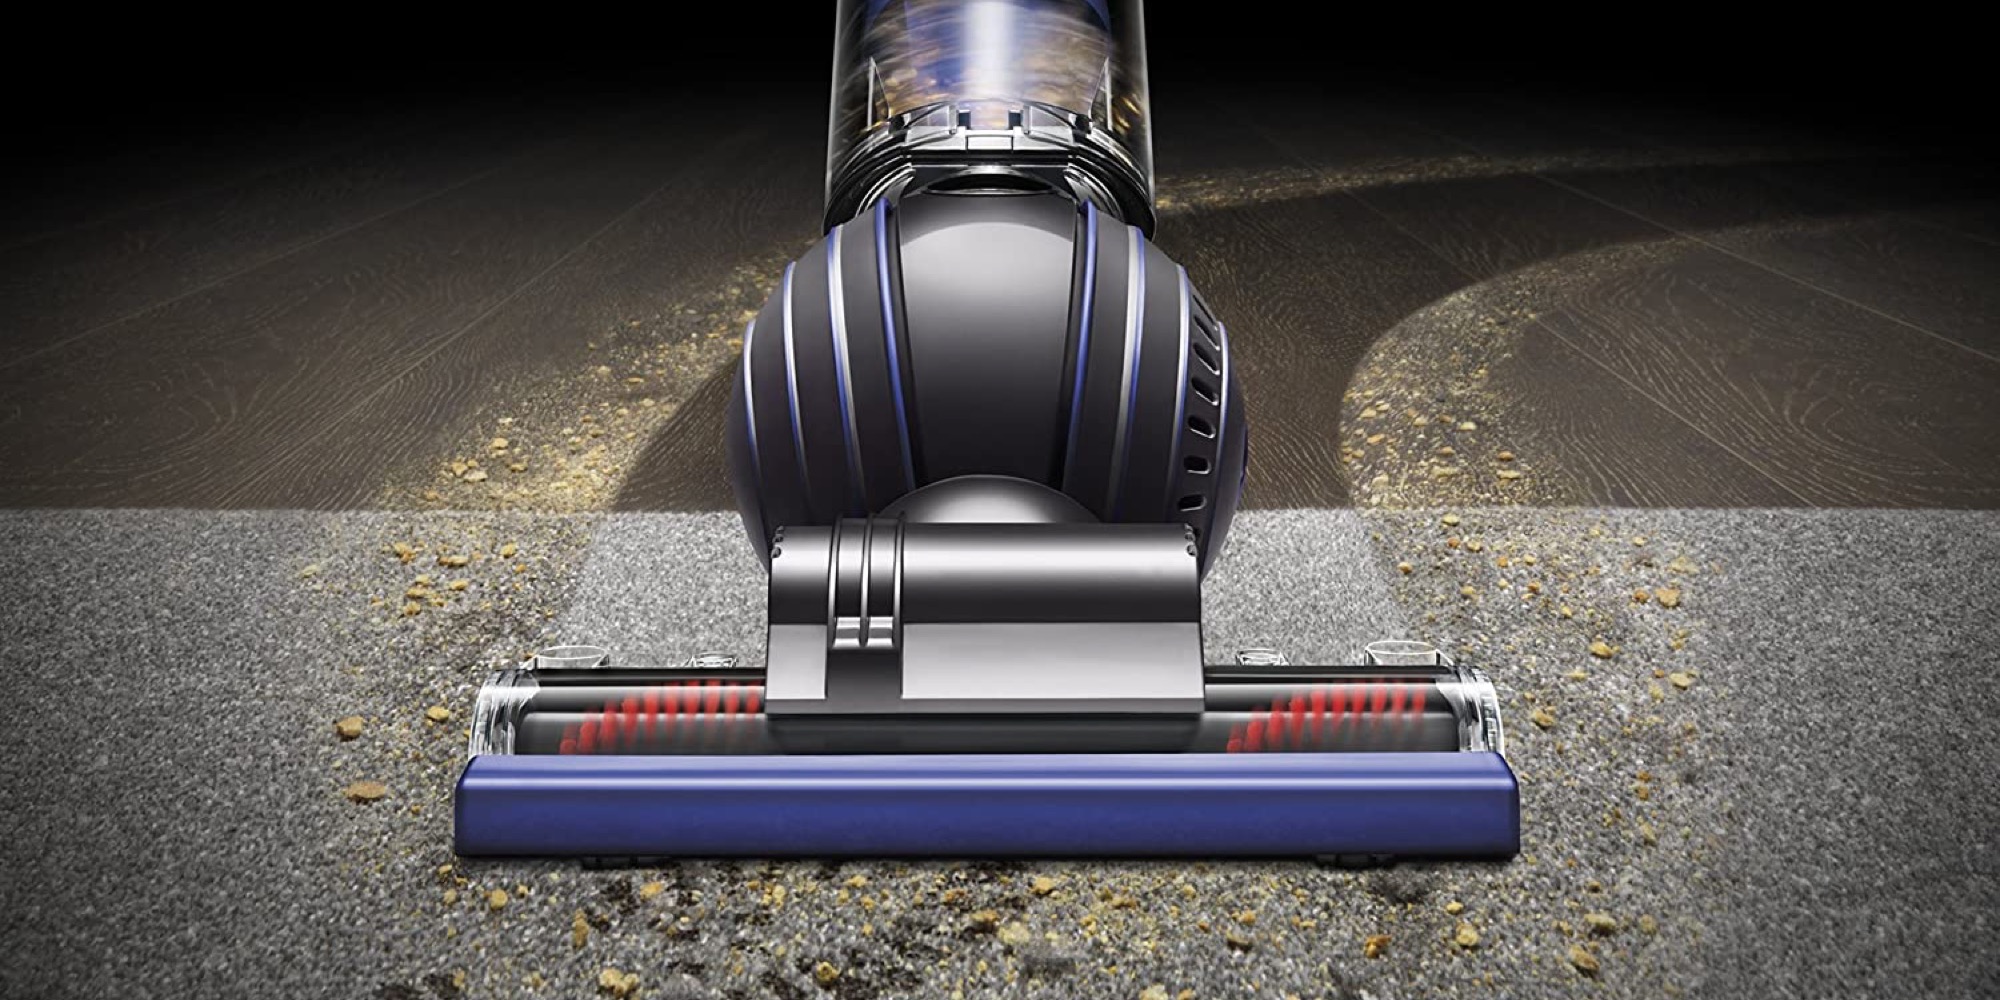 Dyson's Ball Animal 2 Upright Vacuum plummets by $300 in latest refurb.  sale, now $200